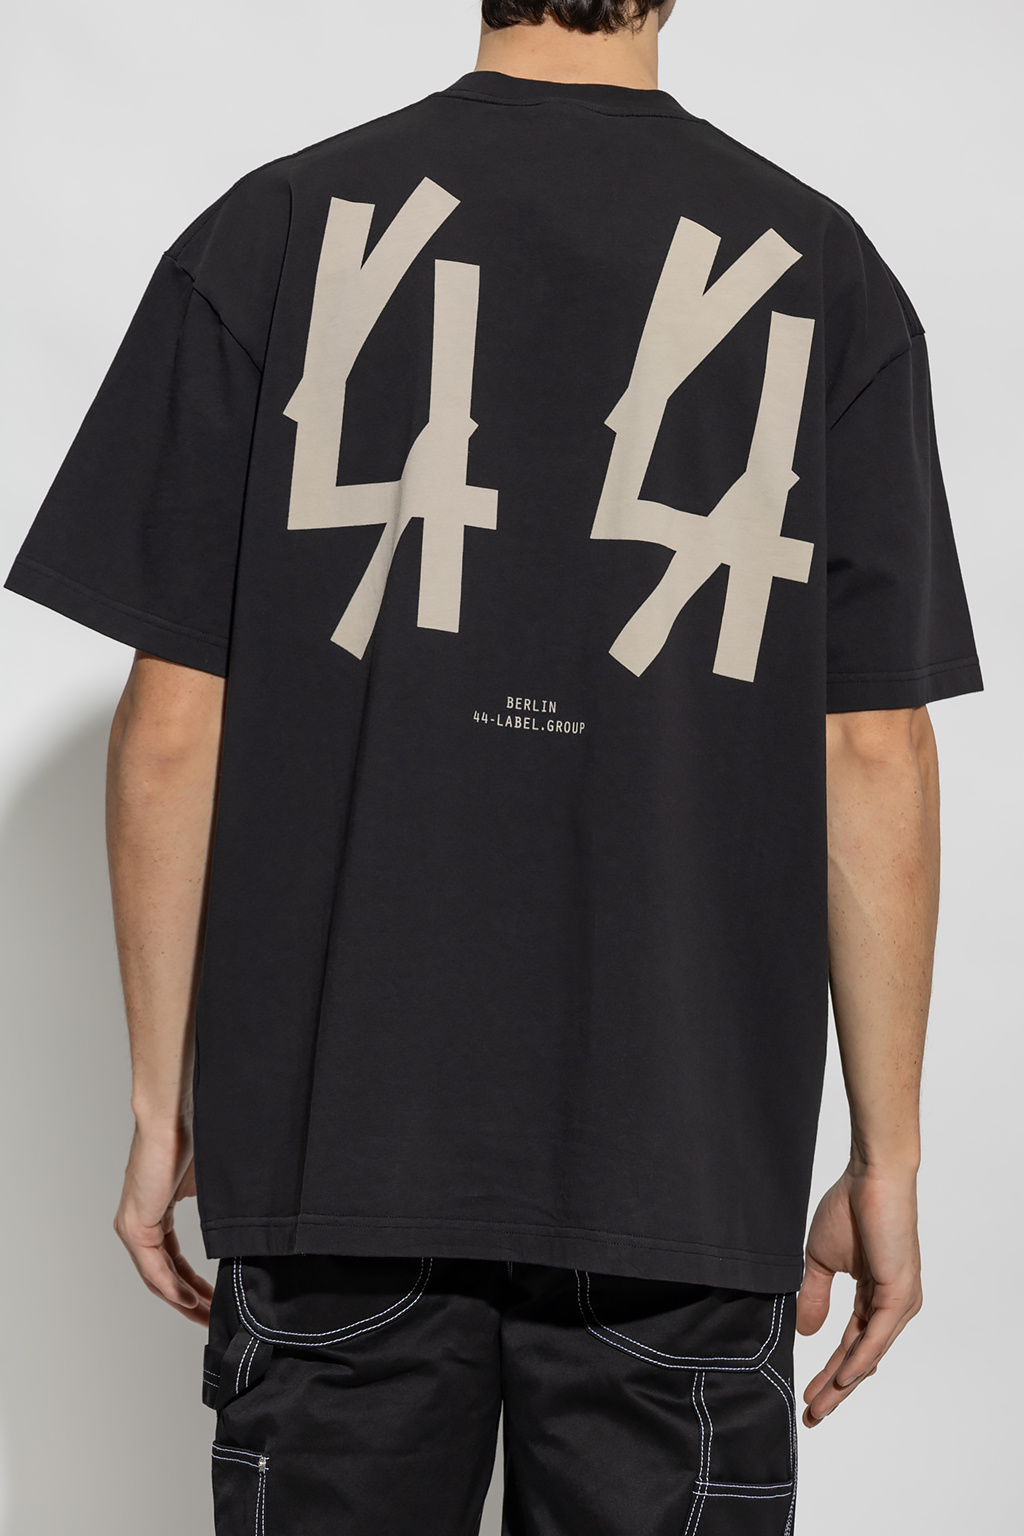 44 Label Group Bershka washed t-shirt with raw edge in stone